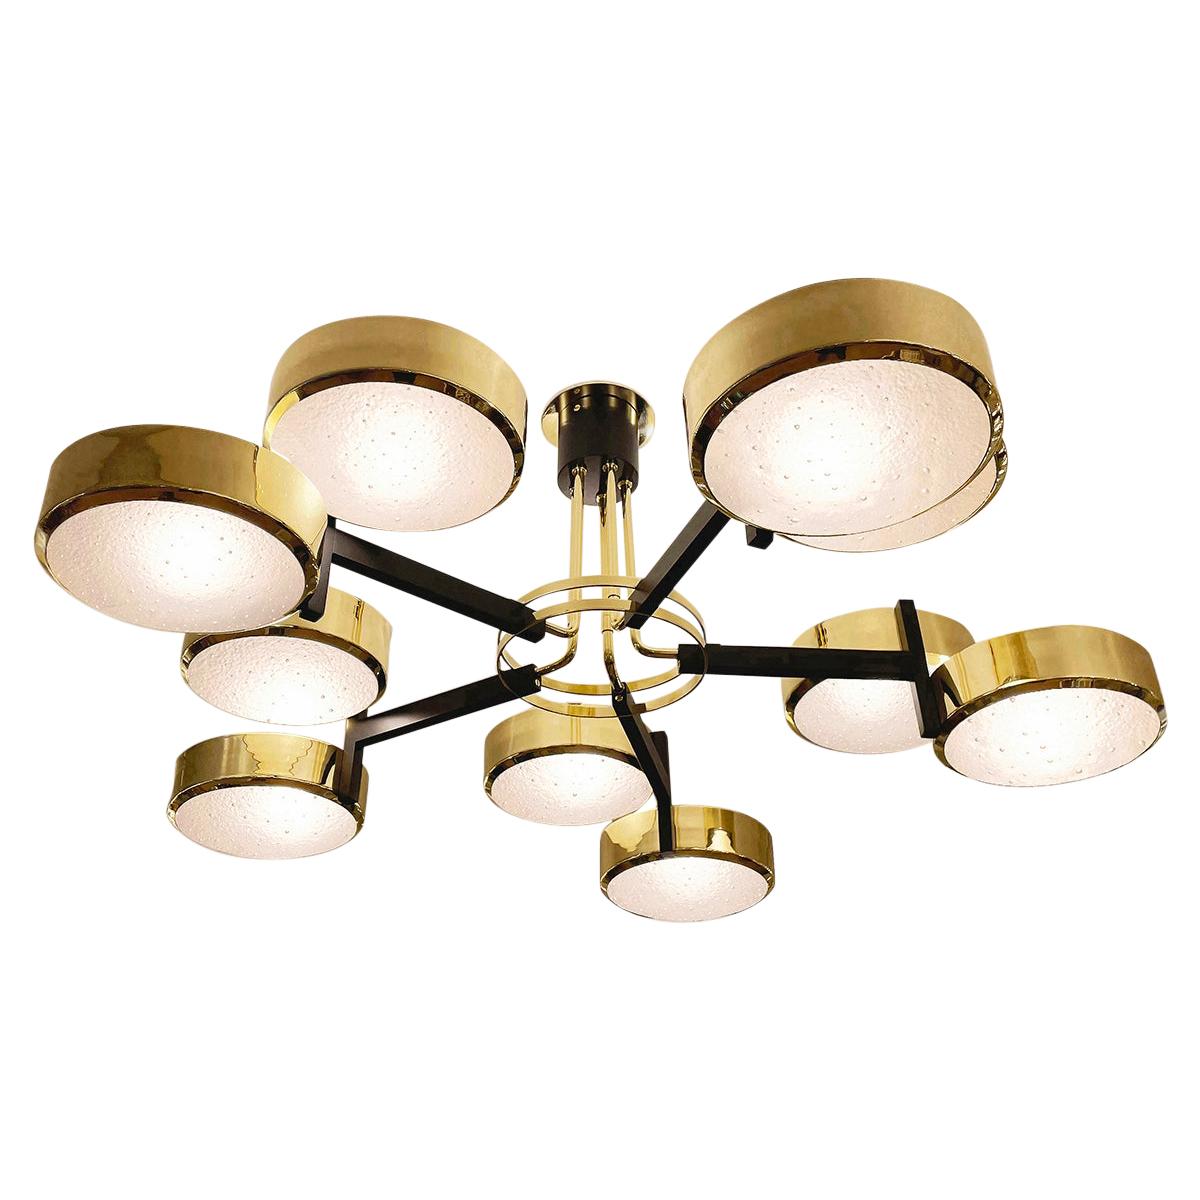 Eclissi Grande Ceiling Light by Gaspare Asaro - Murano Glass Version For Sale